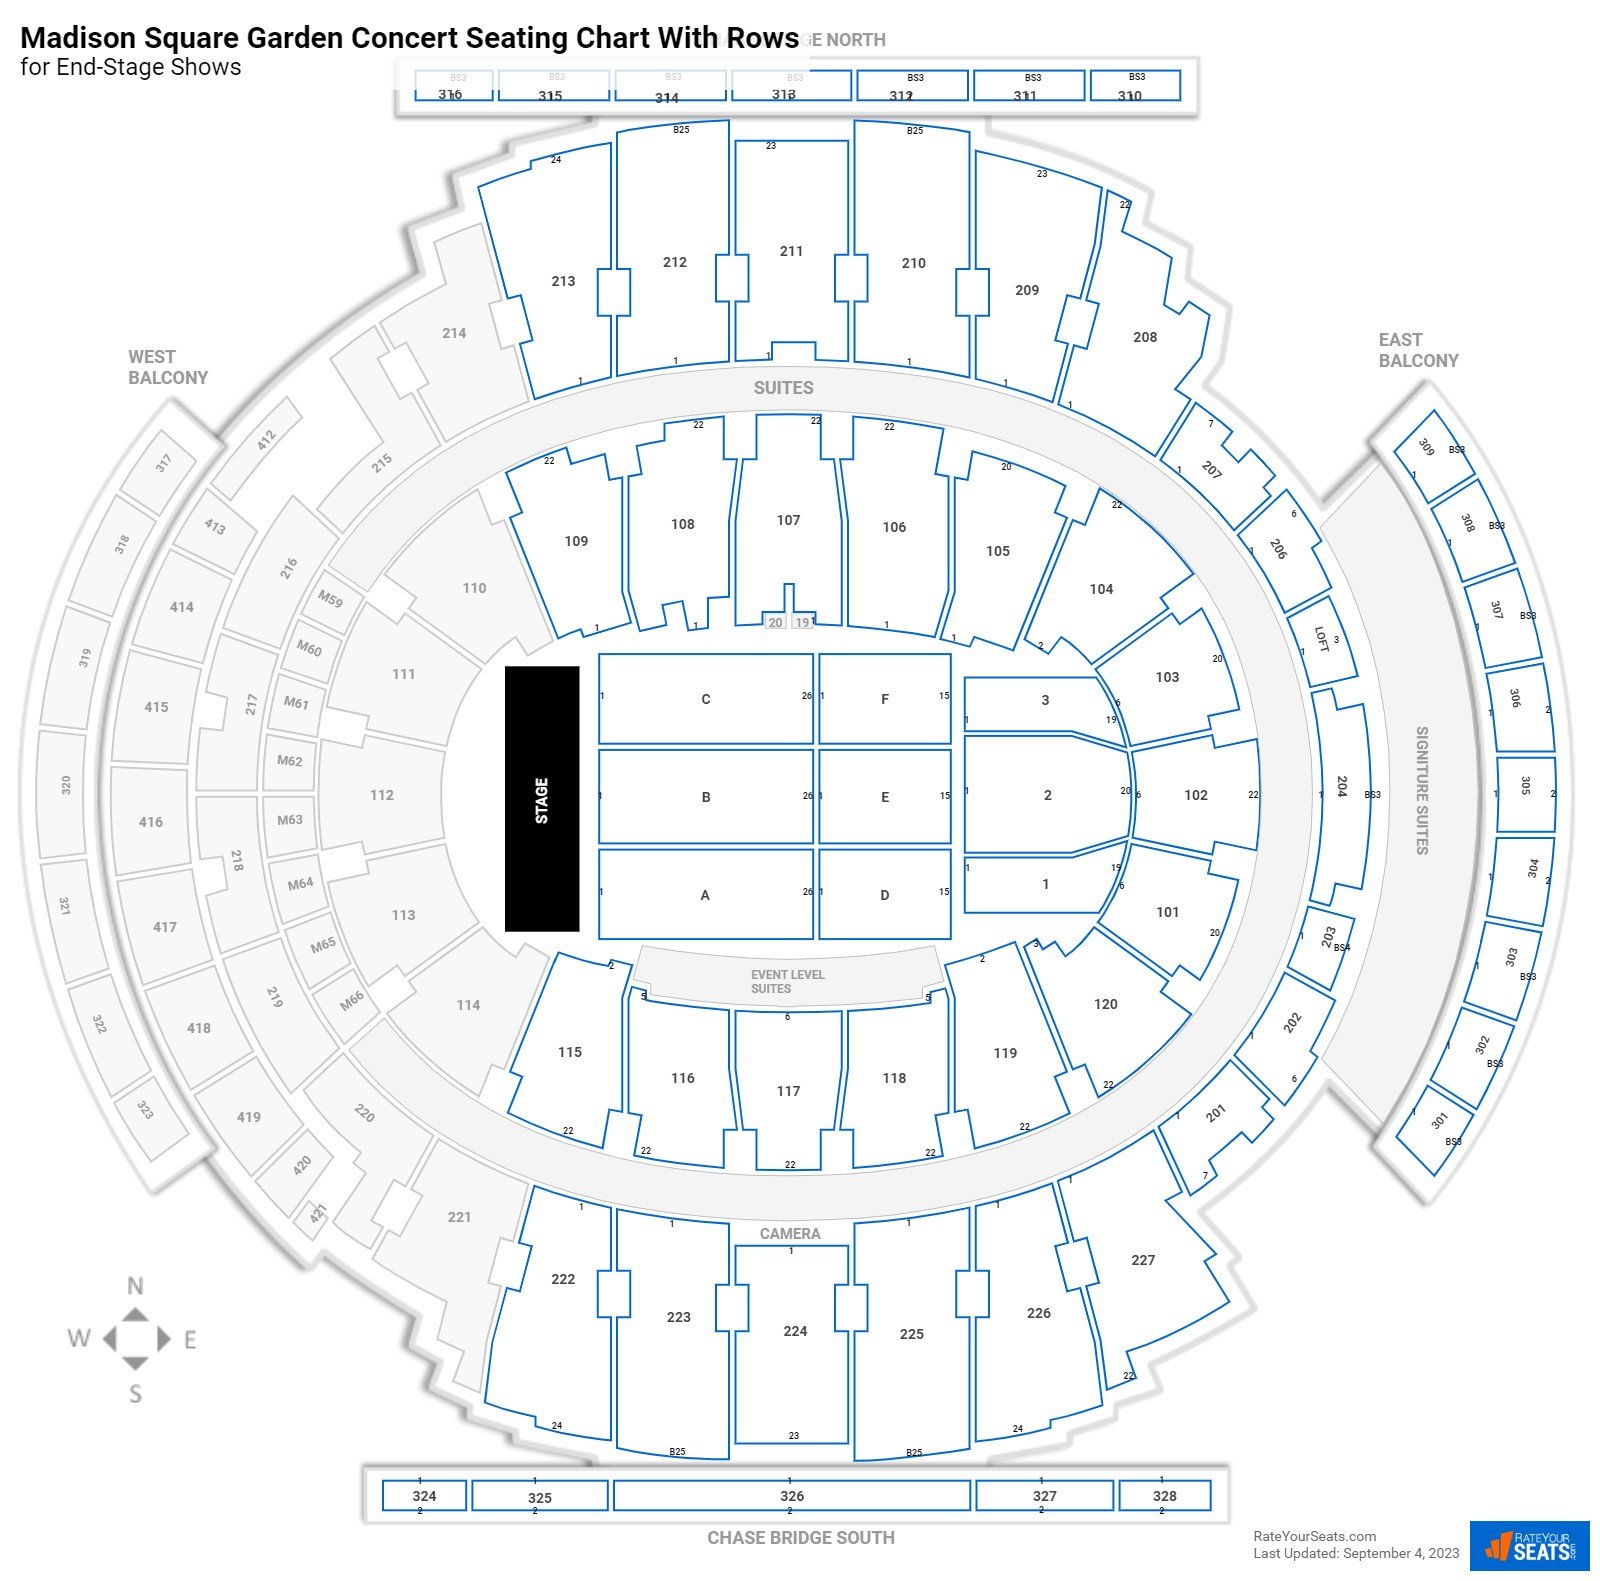 Madison Square Garden Seating For Concerts Rateyourseats Com